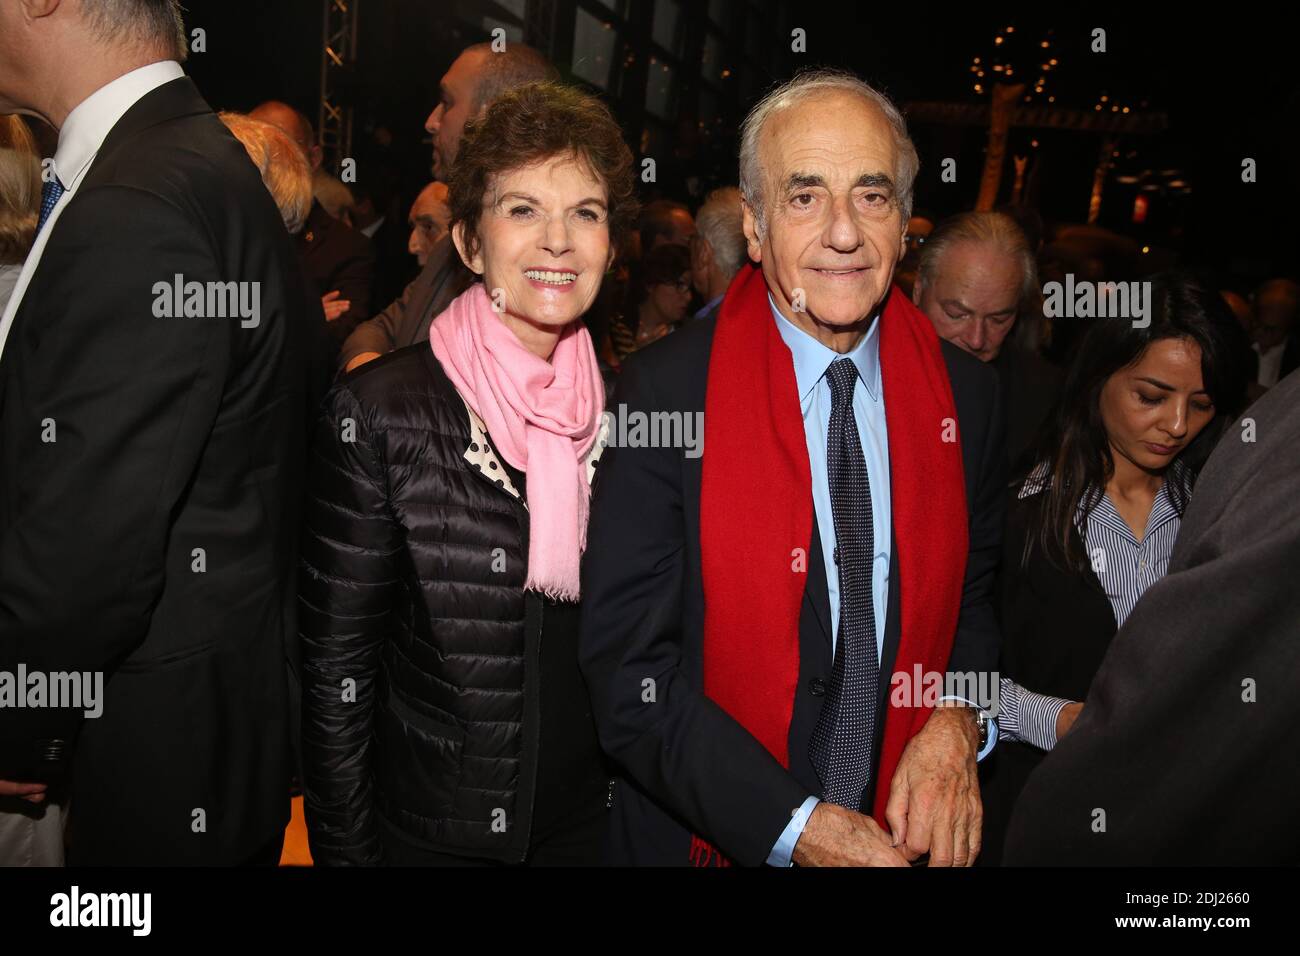 Nicole Avril and Jean-Pierre Elkabbach attending the opening of the  exhibition 'Jacques Chirac ou le dialogue des cultures' (Jacques Chirac or  The Dialog of Cultures) held at Musee du Quai Branly, in